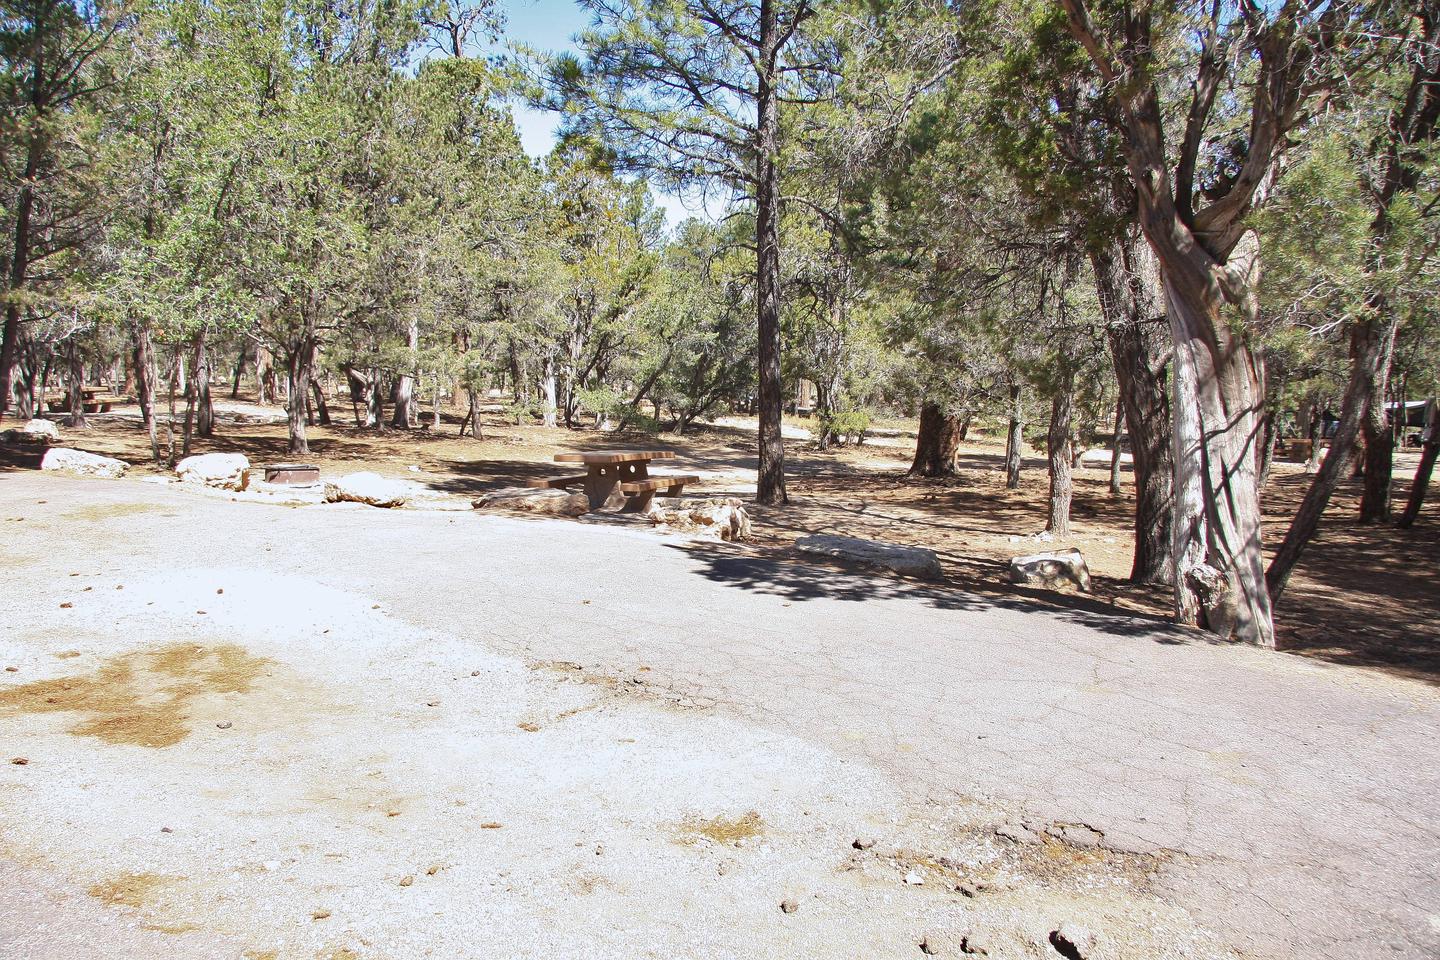 Picnic table, fire pit and parking spot, Mather Campground